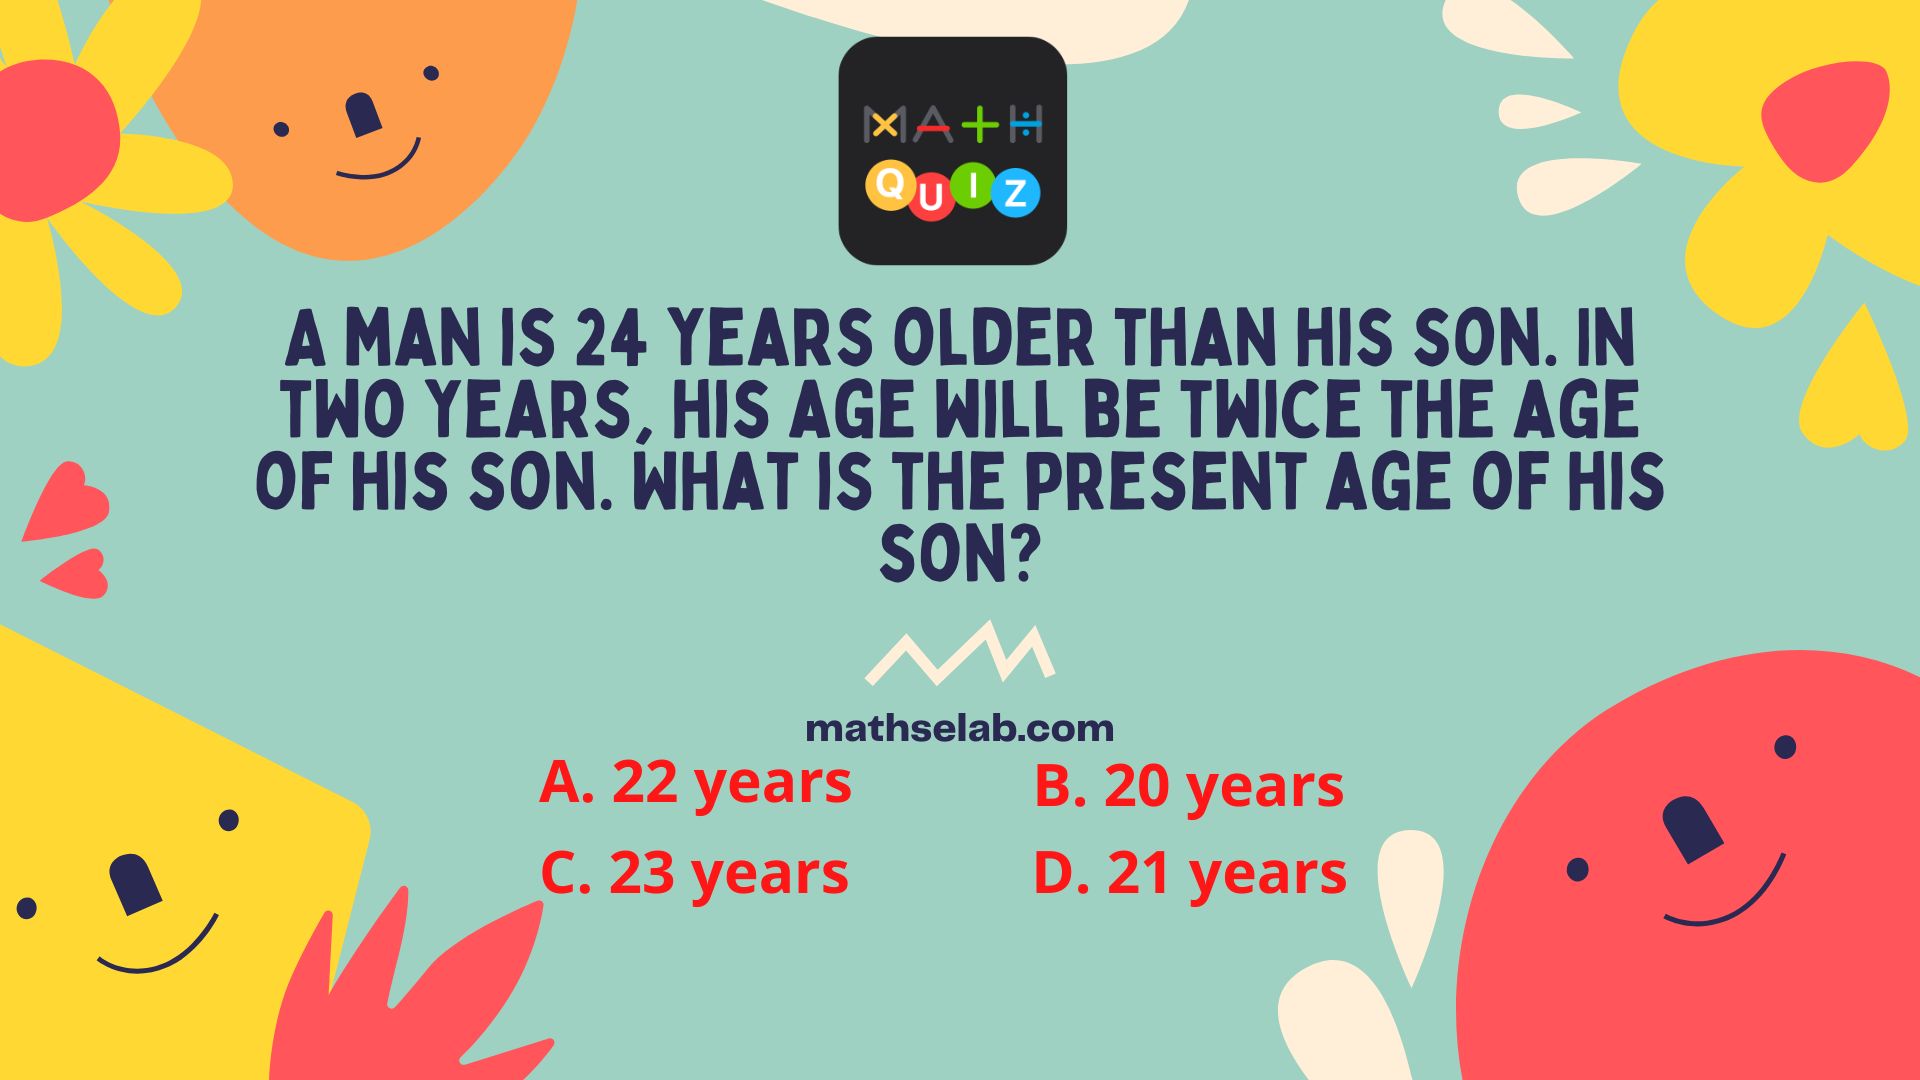 A man is 24 years older than his son. In two years, his age will be twice the age of his son. What is the present age of his son? - mathselab.com